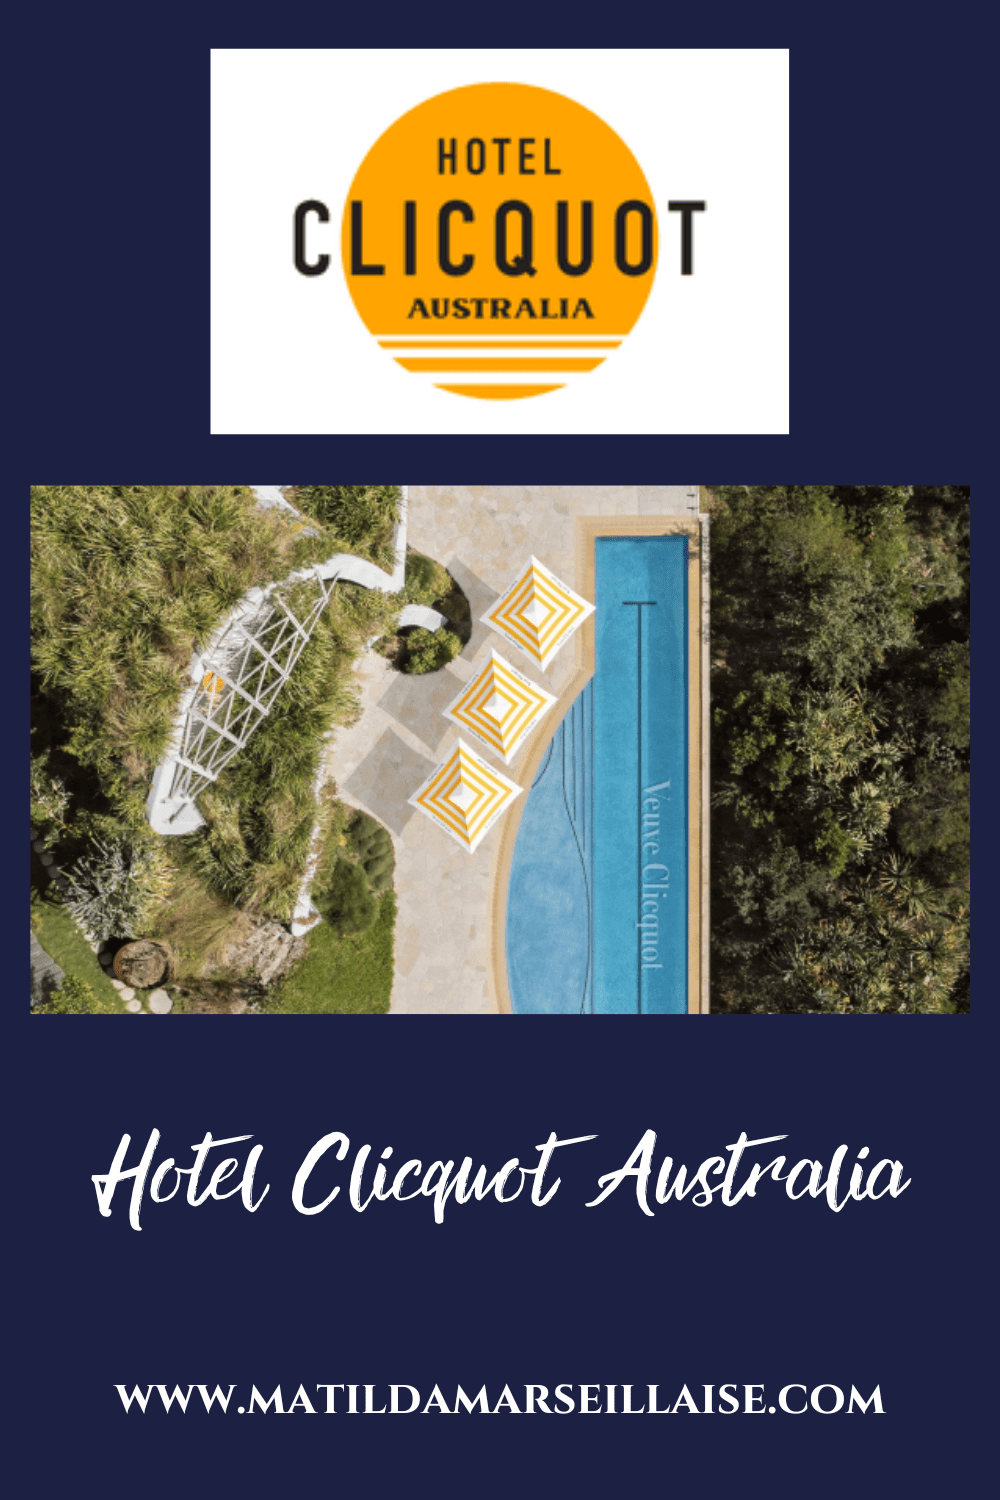 Hotel Clicquot Australia is the only Veuve Clicquot boutique hotel in the world but it’s only open for a short-time